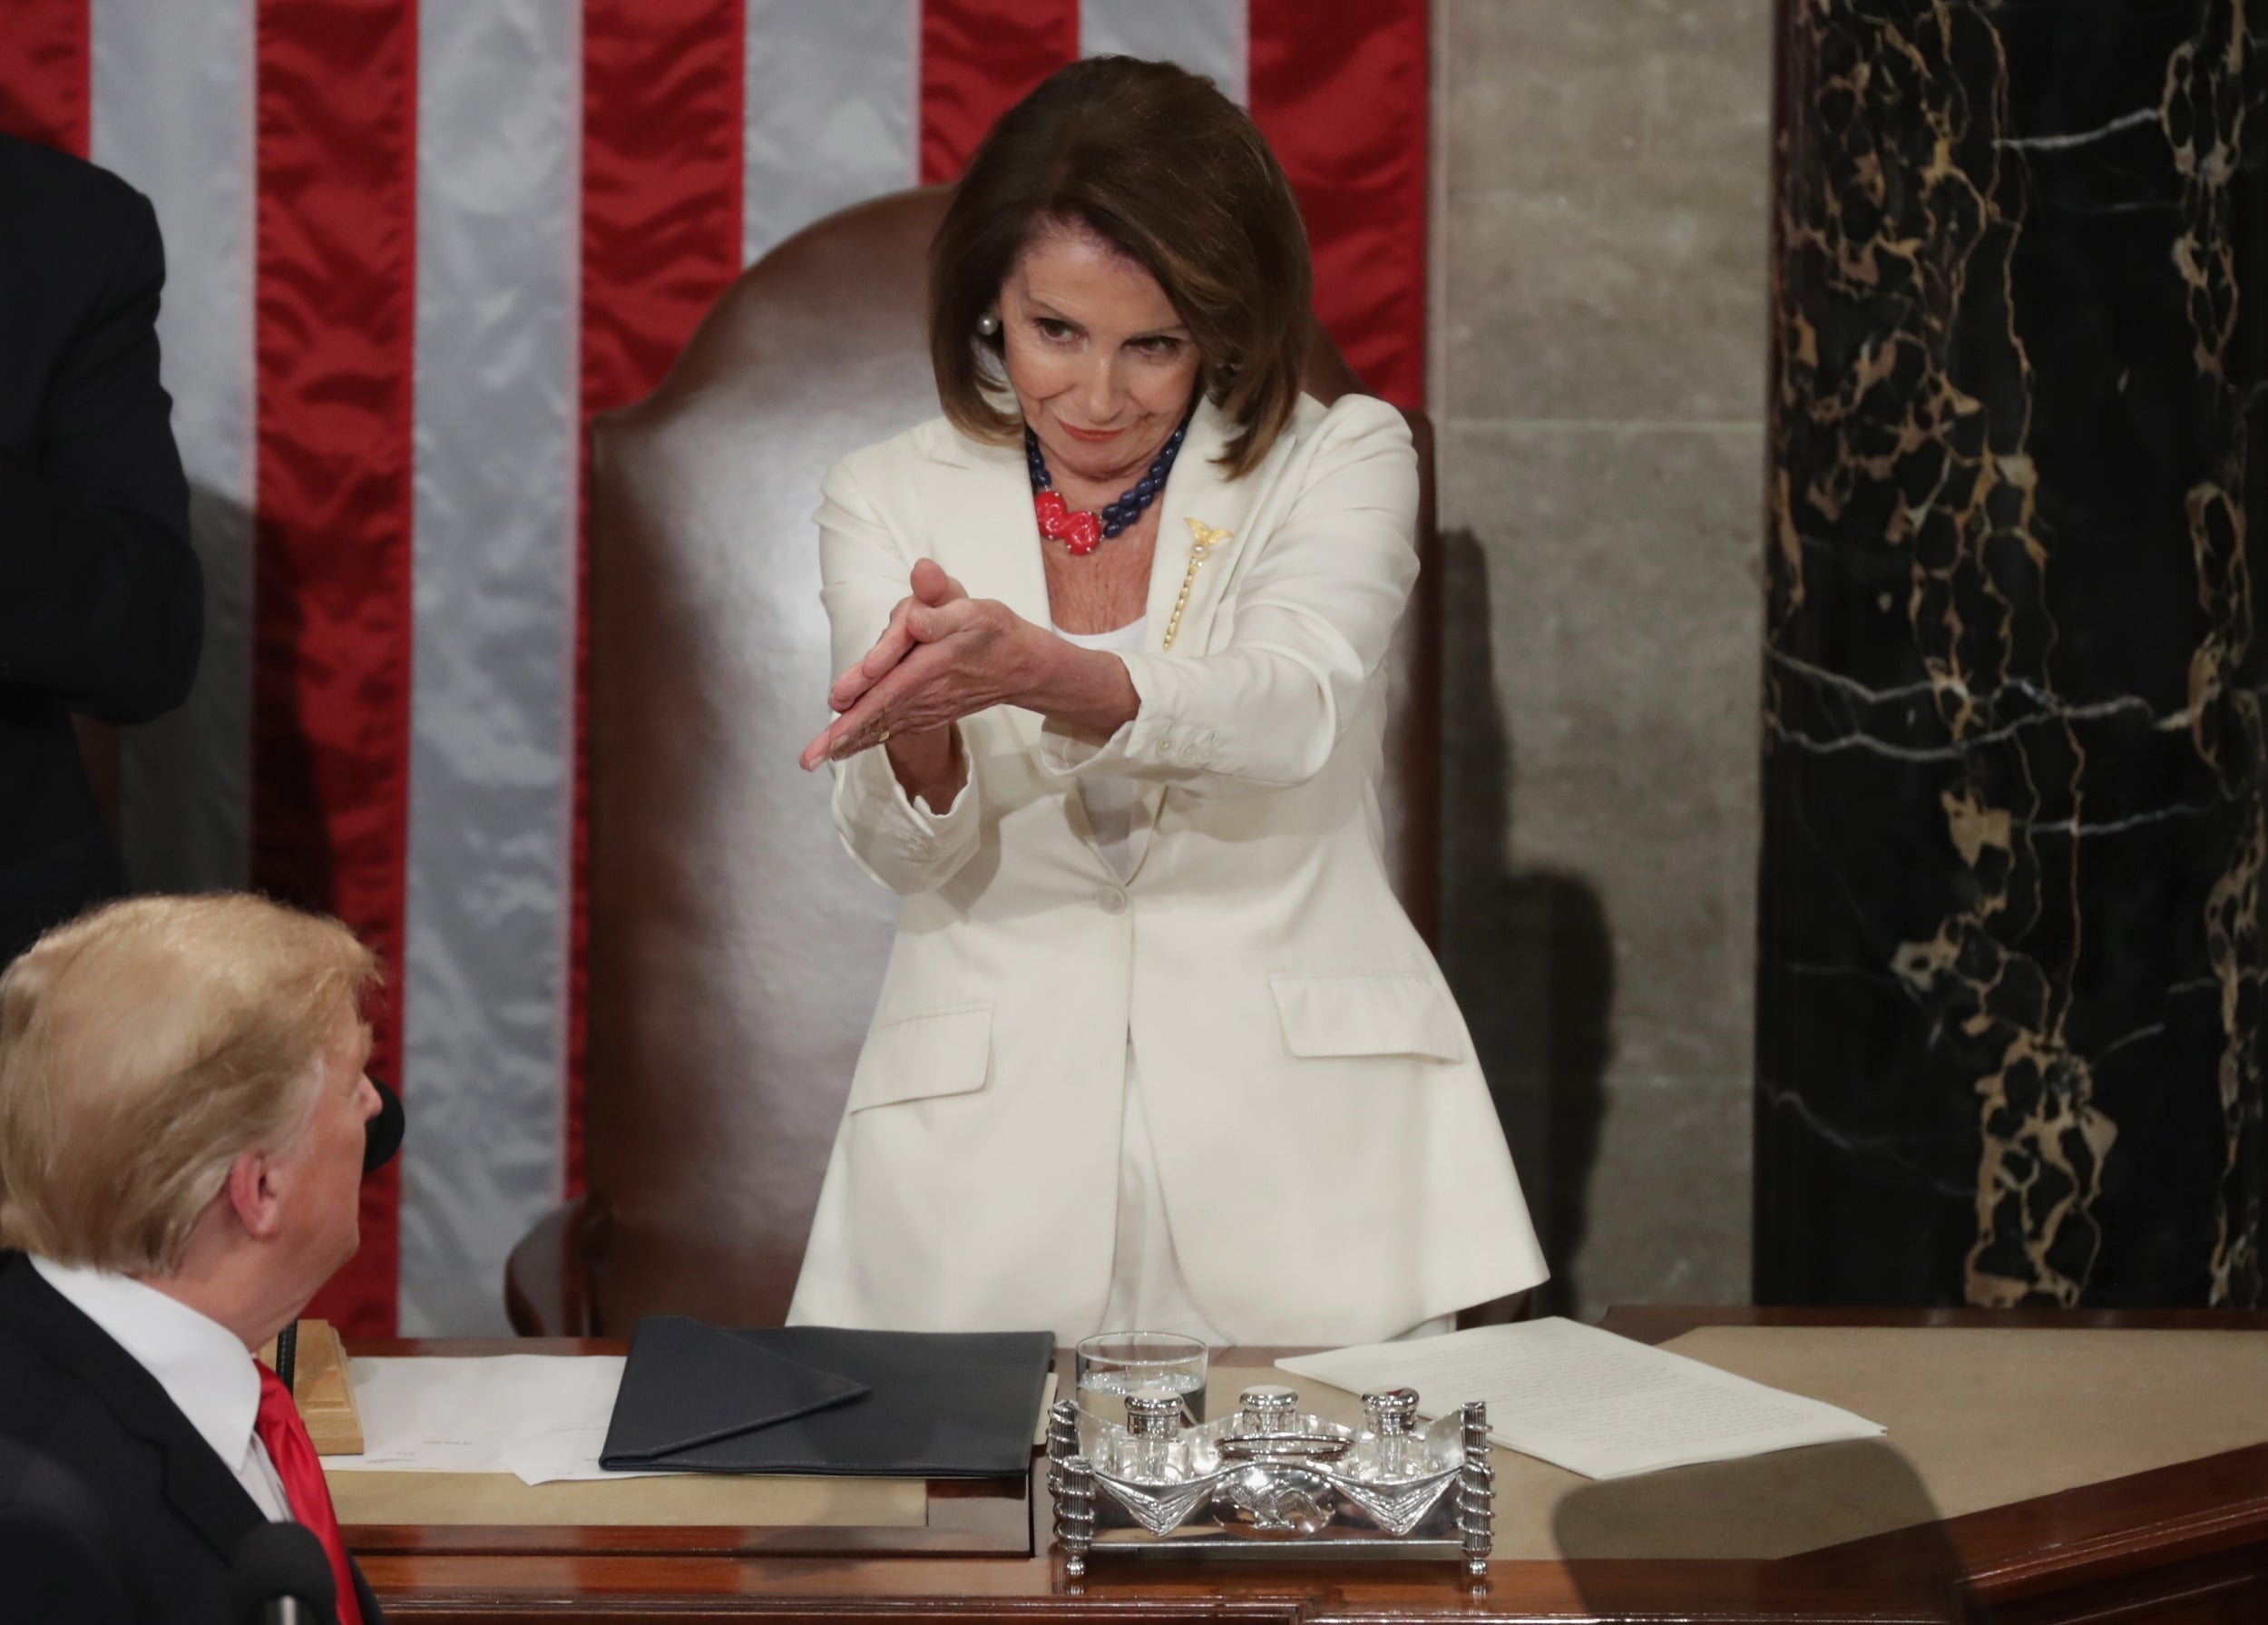 Nancy Pelosi applauds Donald Trump during the 2019 State of the Union address